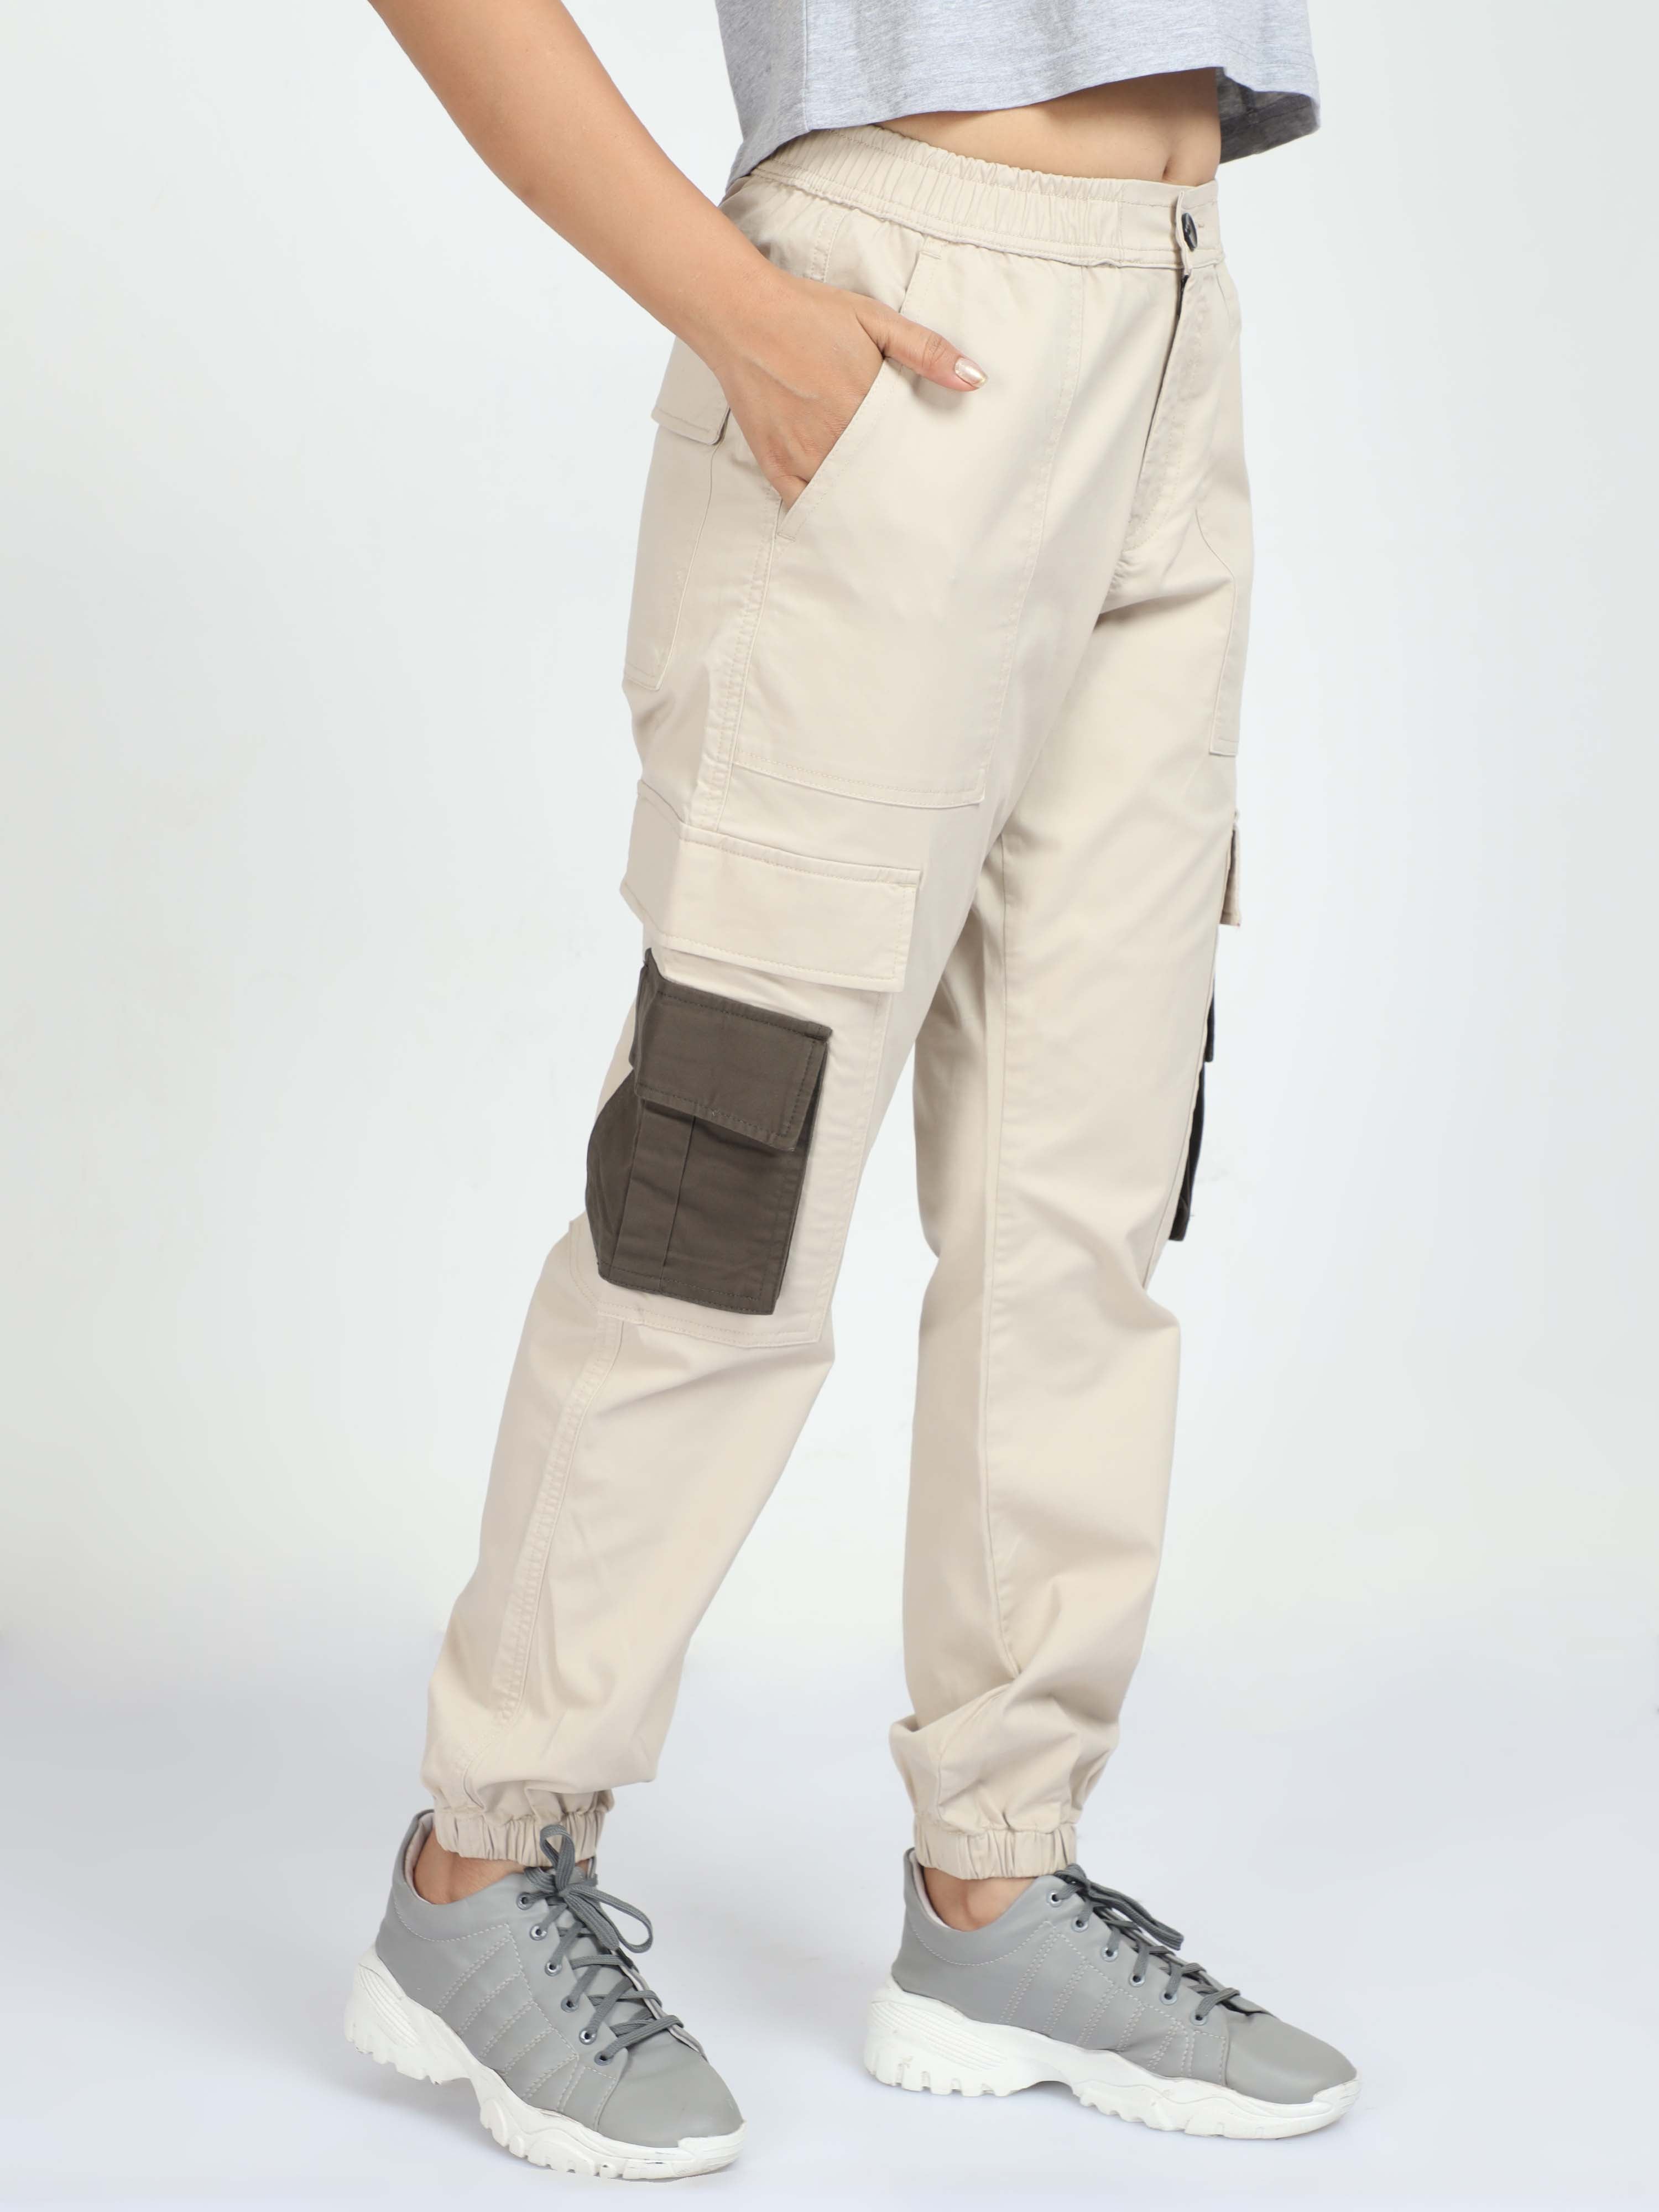 Women's High-rise Slim Fit Ankle Pants - A New Day™ Cream 26 : Target